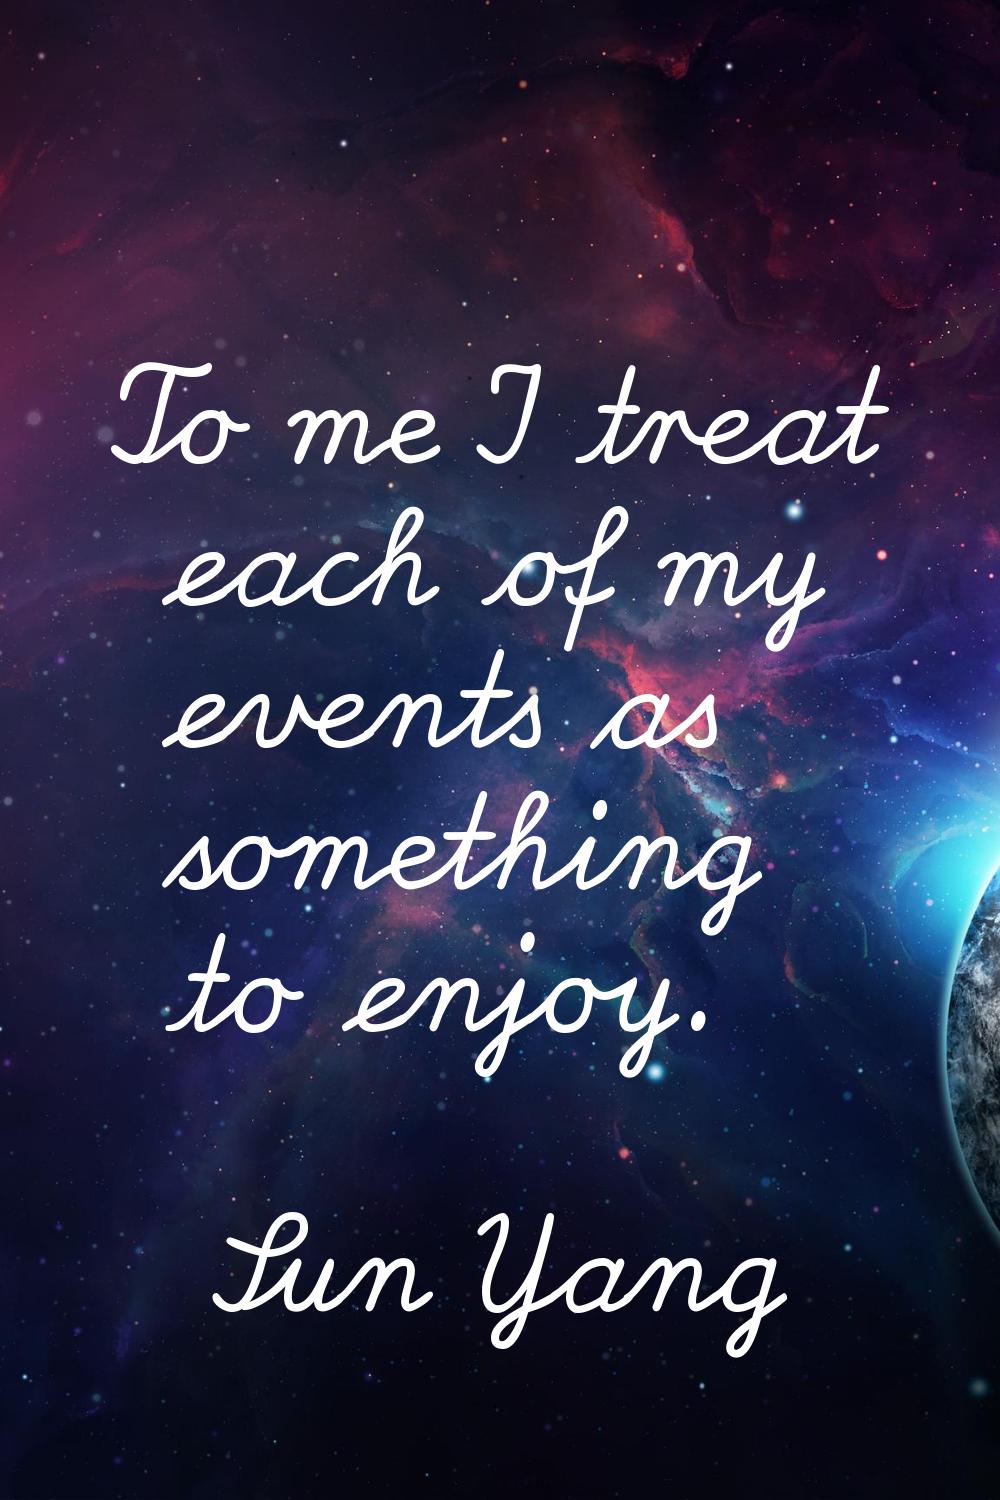 To me I treat each of my events as something to enjoy.